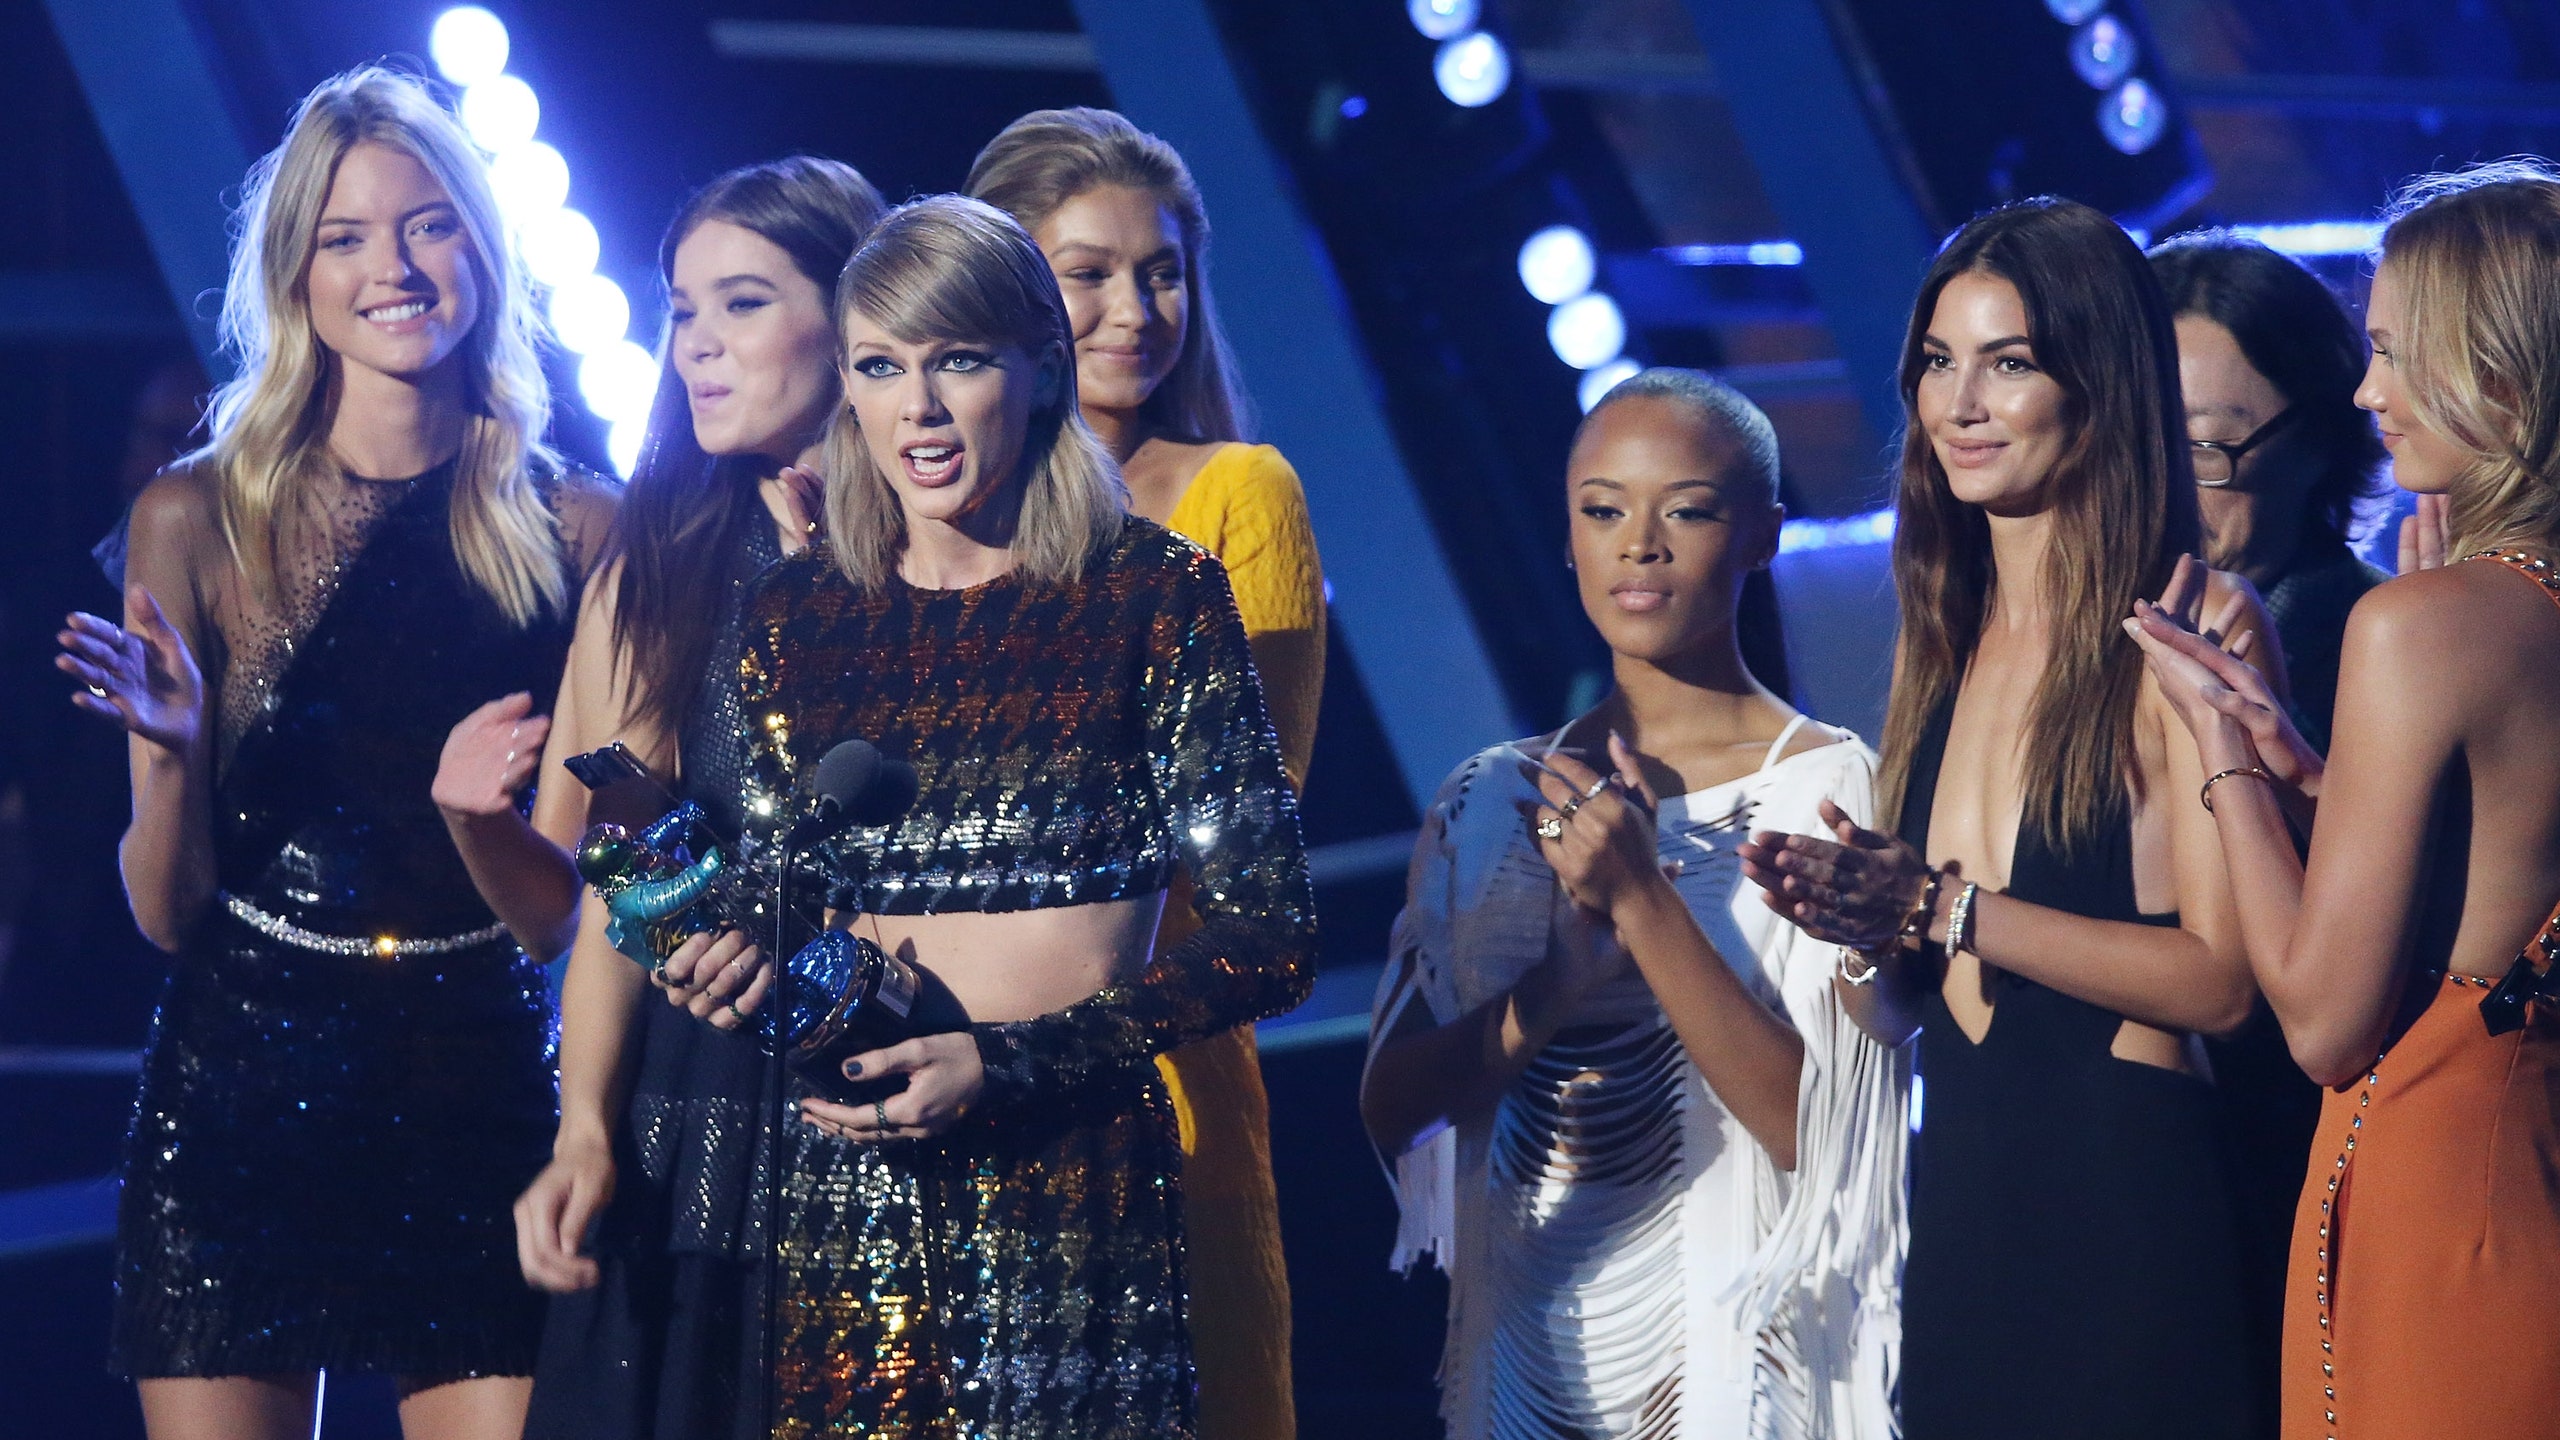 Are We Officially Experiencing the Backlash of Taylor Swift?